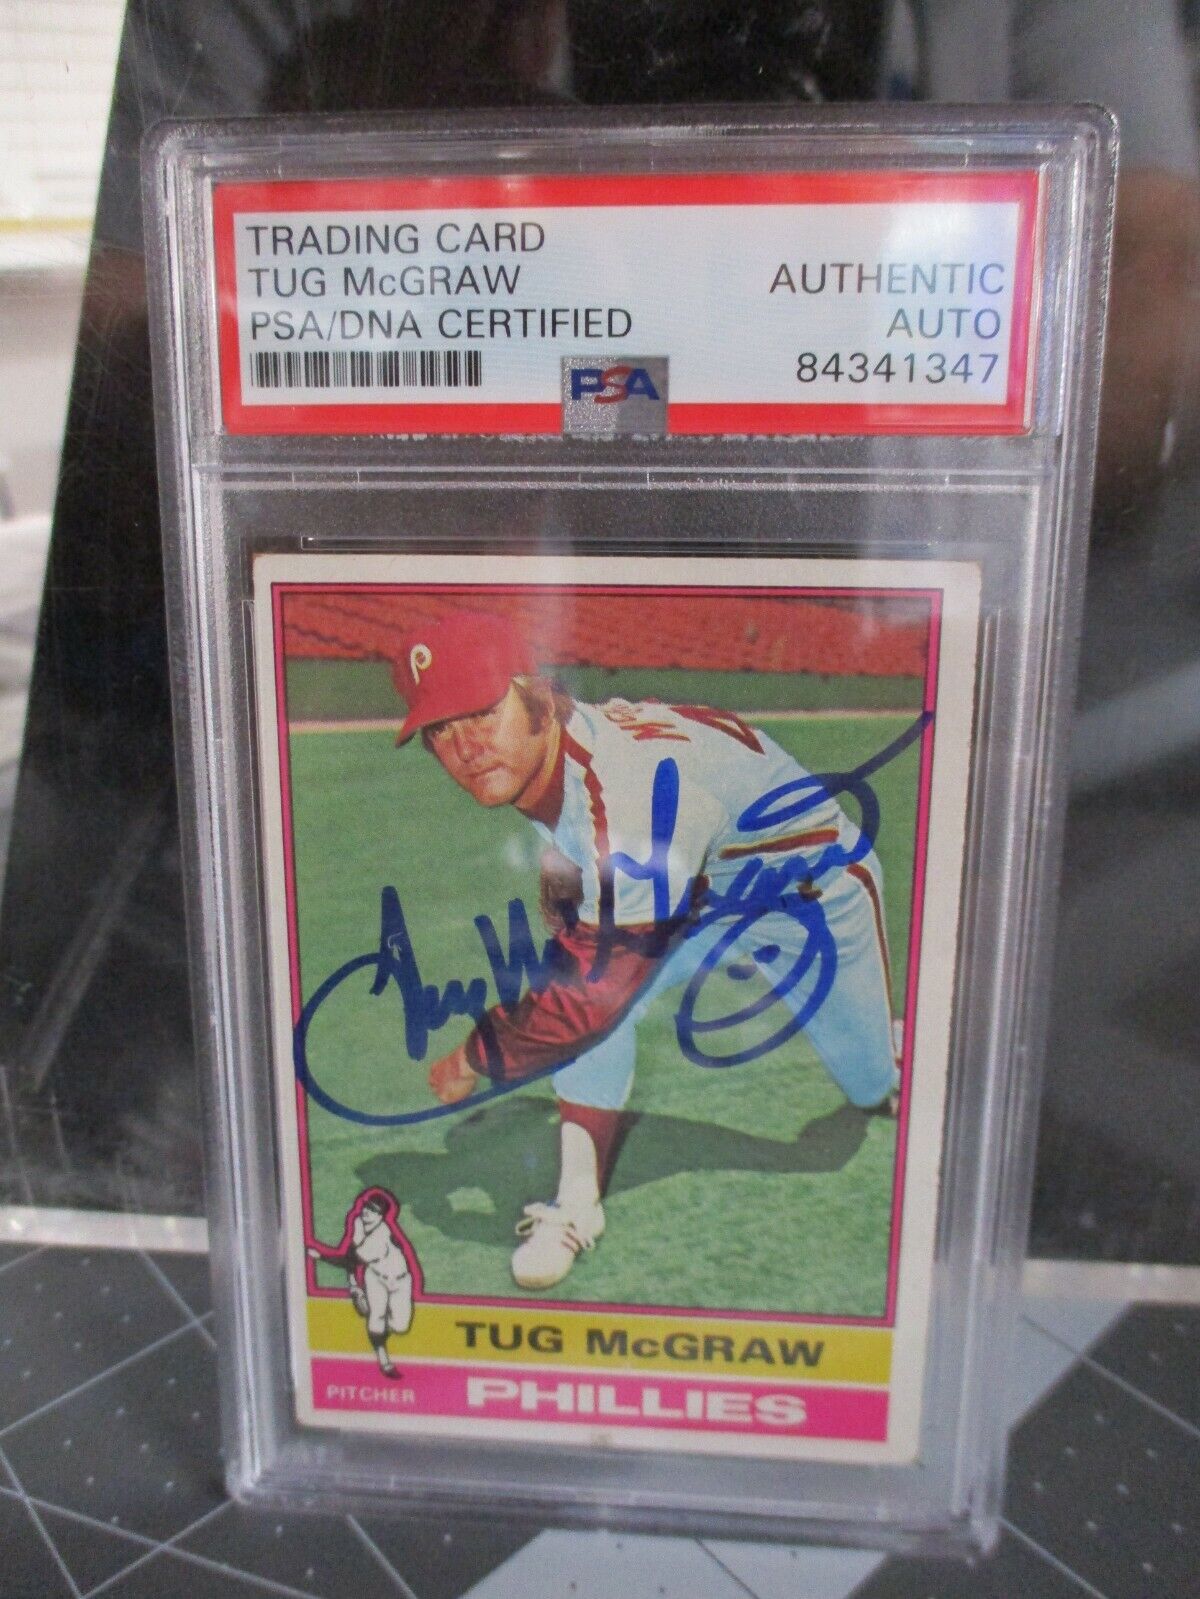 Tug McGraw 1976 Topps autographed card PSA SLABBED  84341347